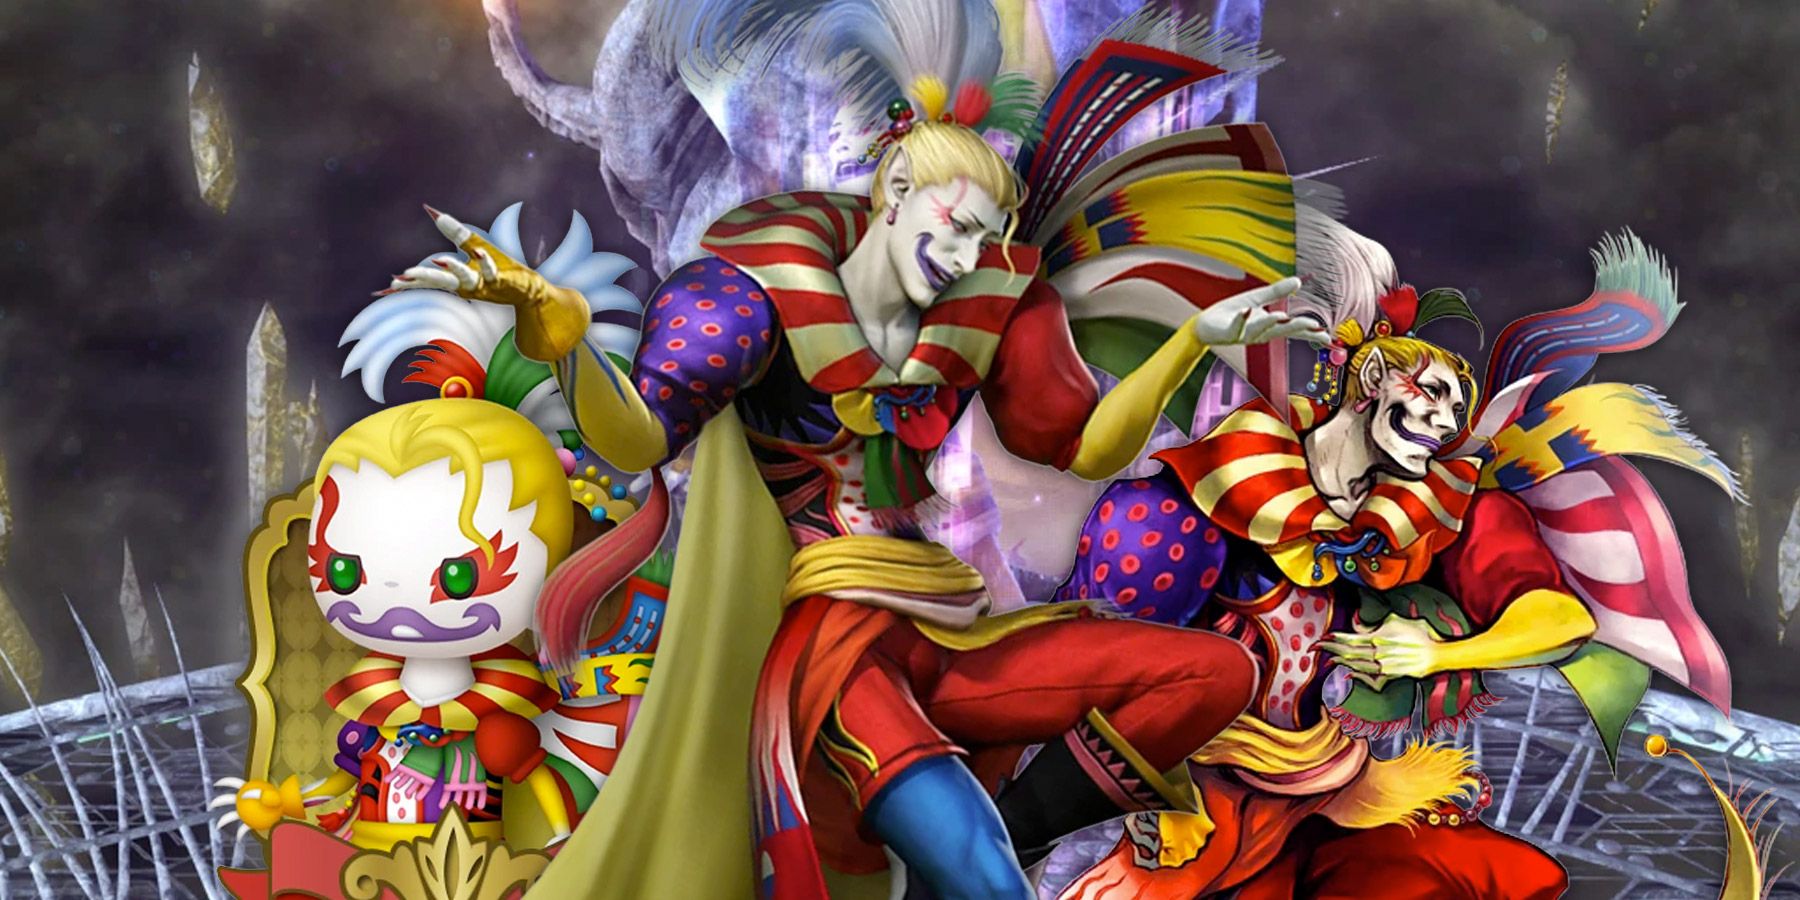 Kefka Palazzo is one of Final Fantasy’s most popular villains, so fans may ...